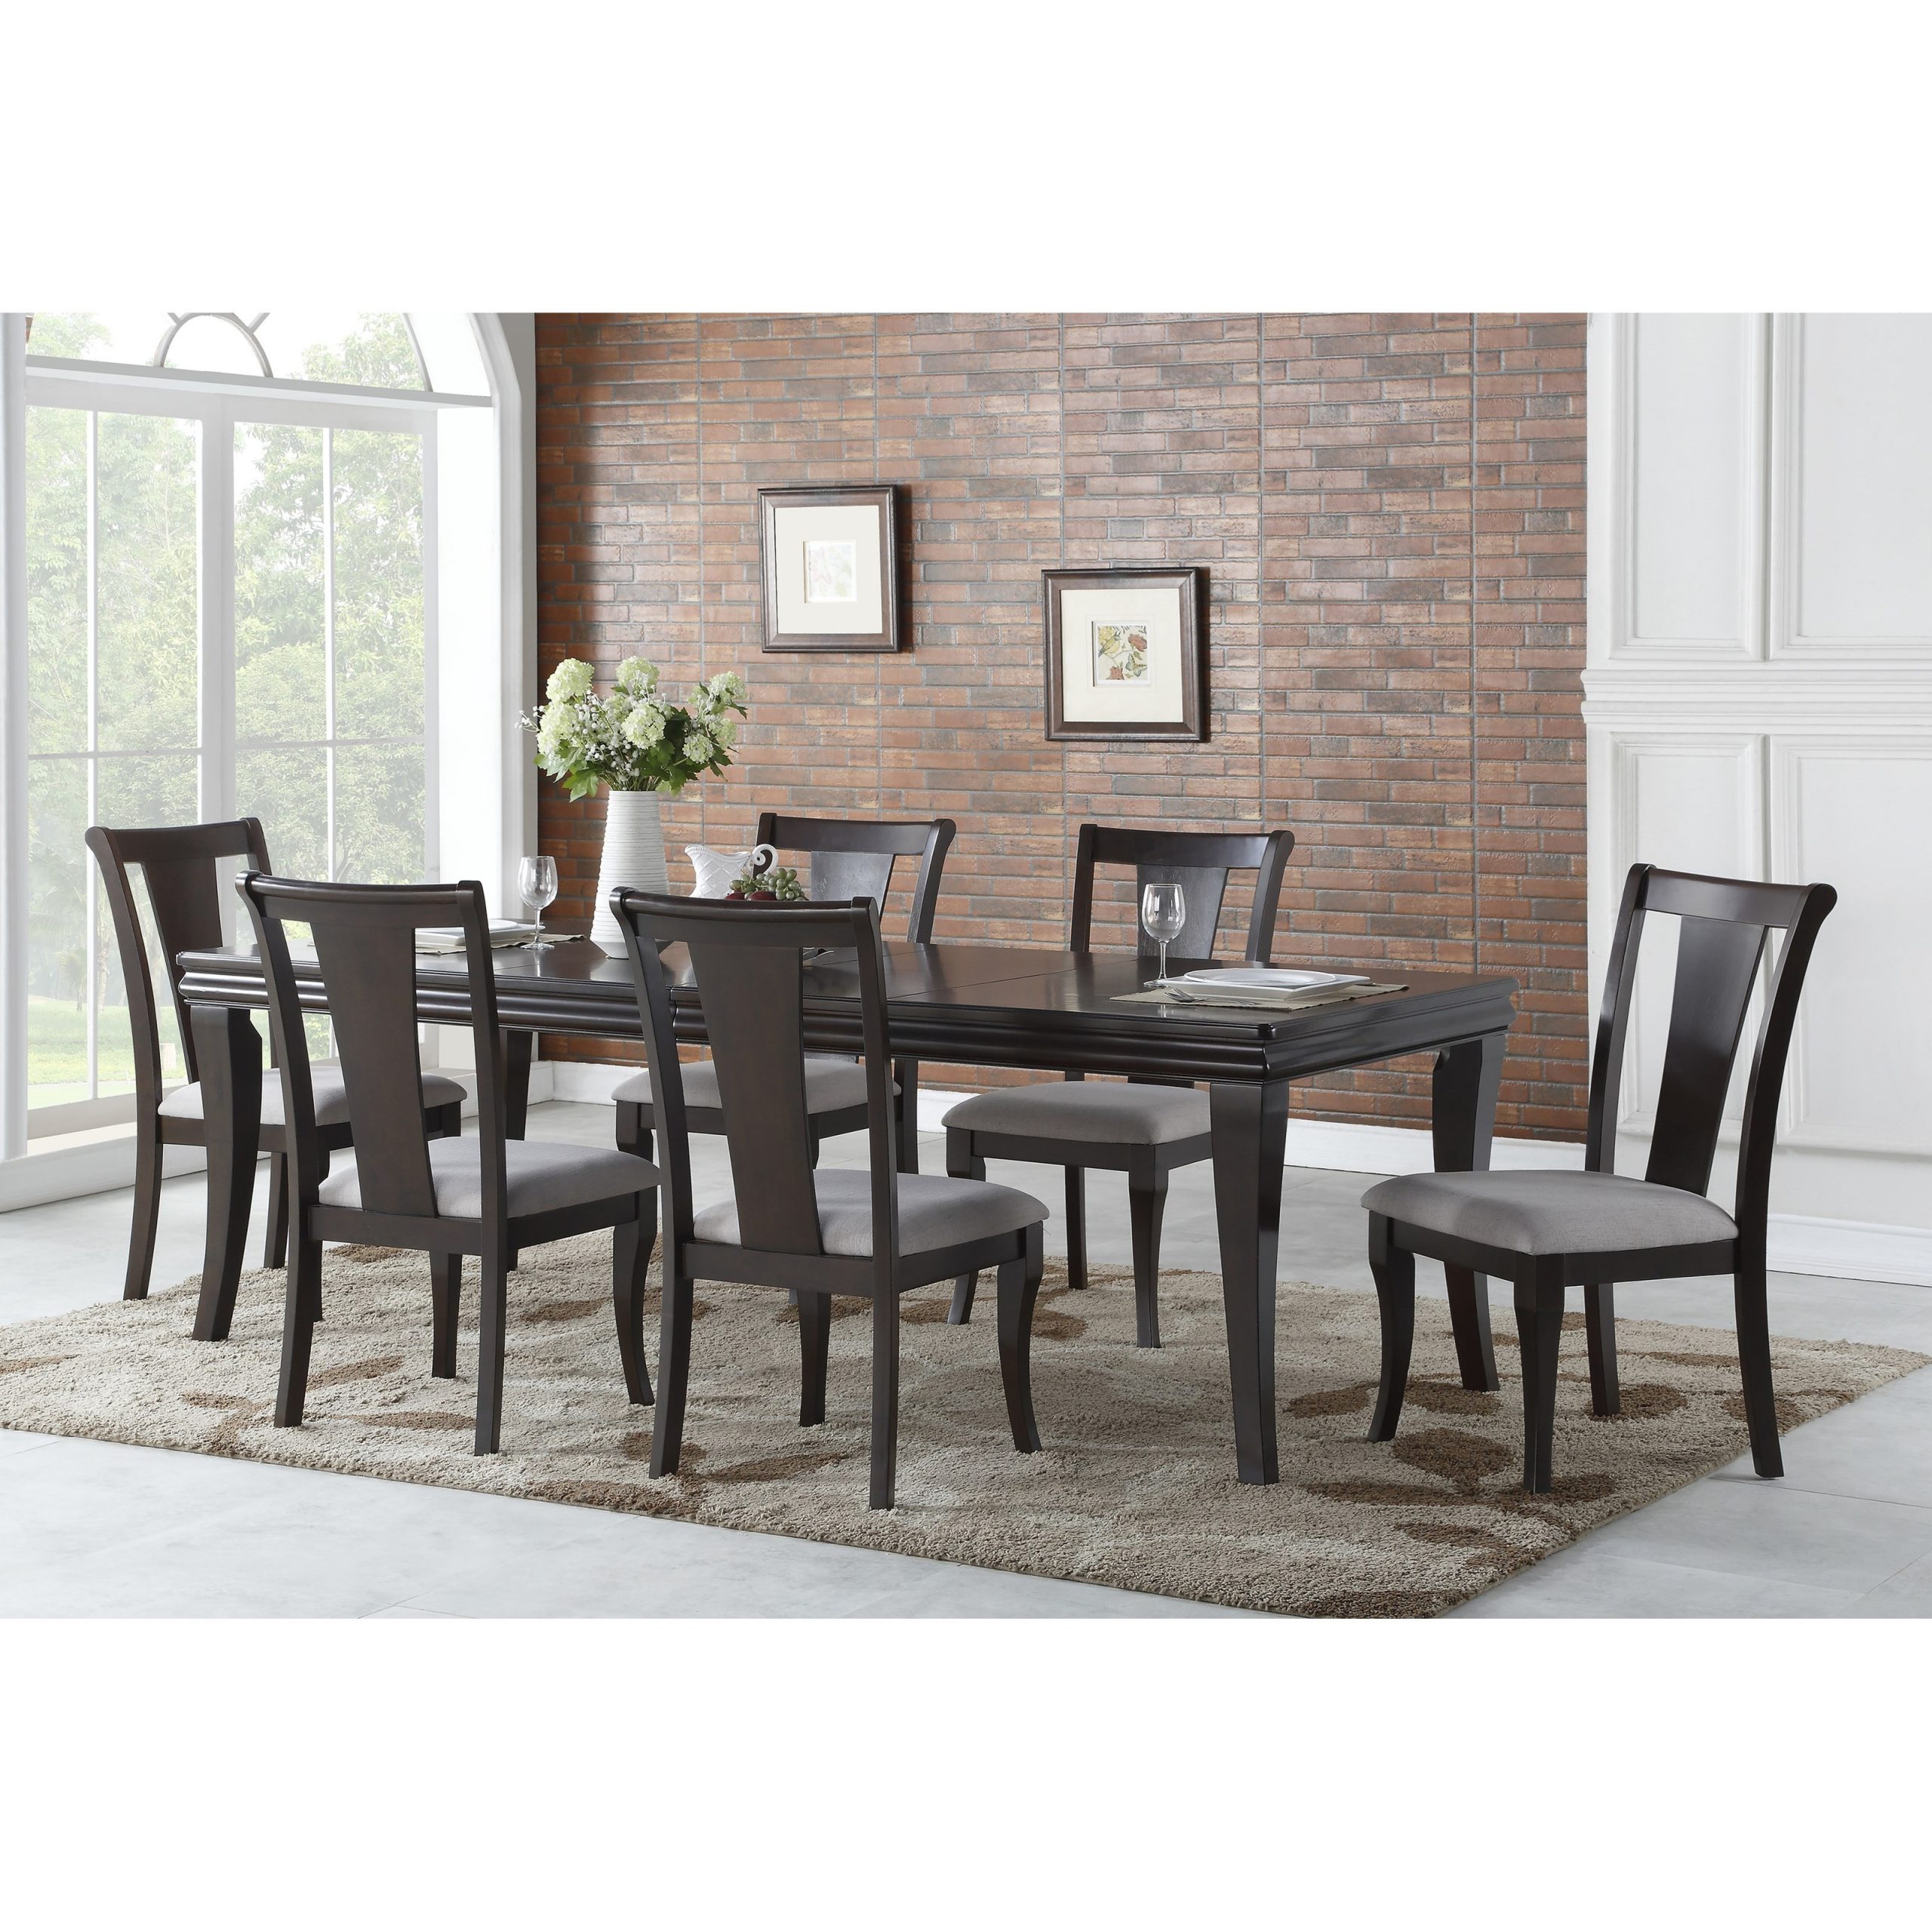 Steve Silver Aubrey Transitional Dining Room Set Northeast within size 3200 X 3200